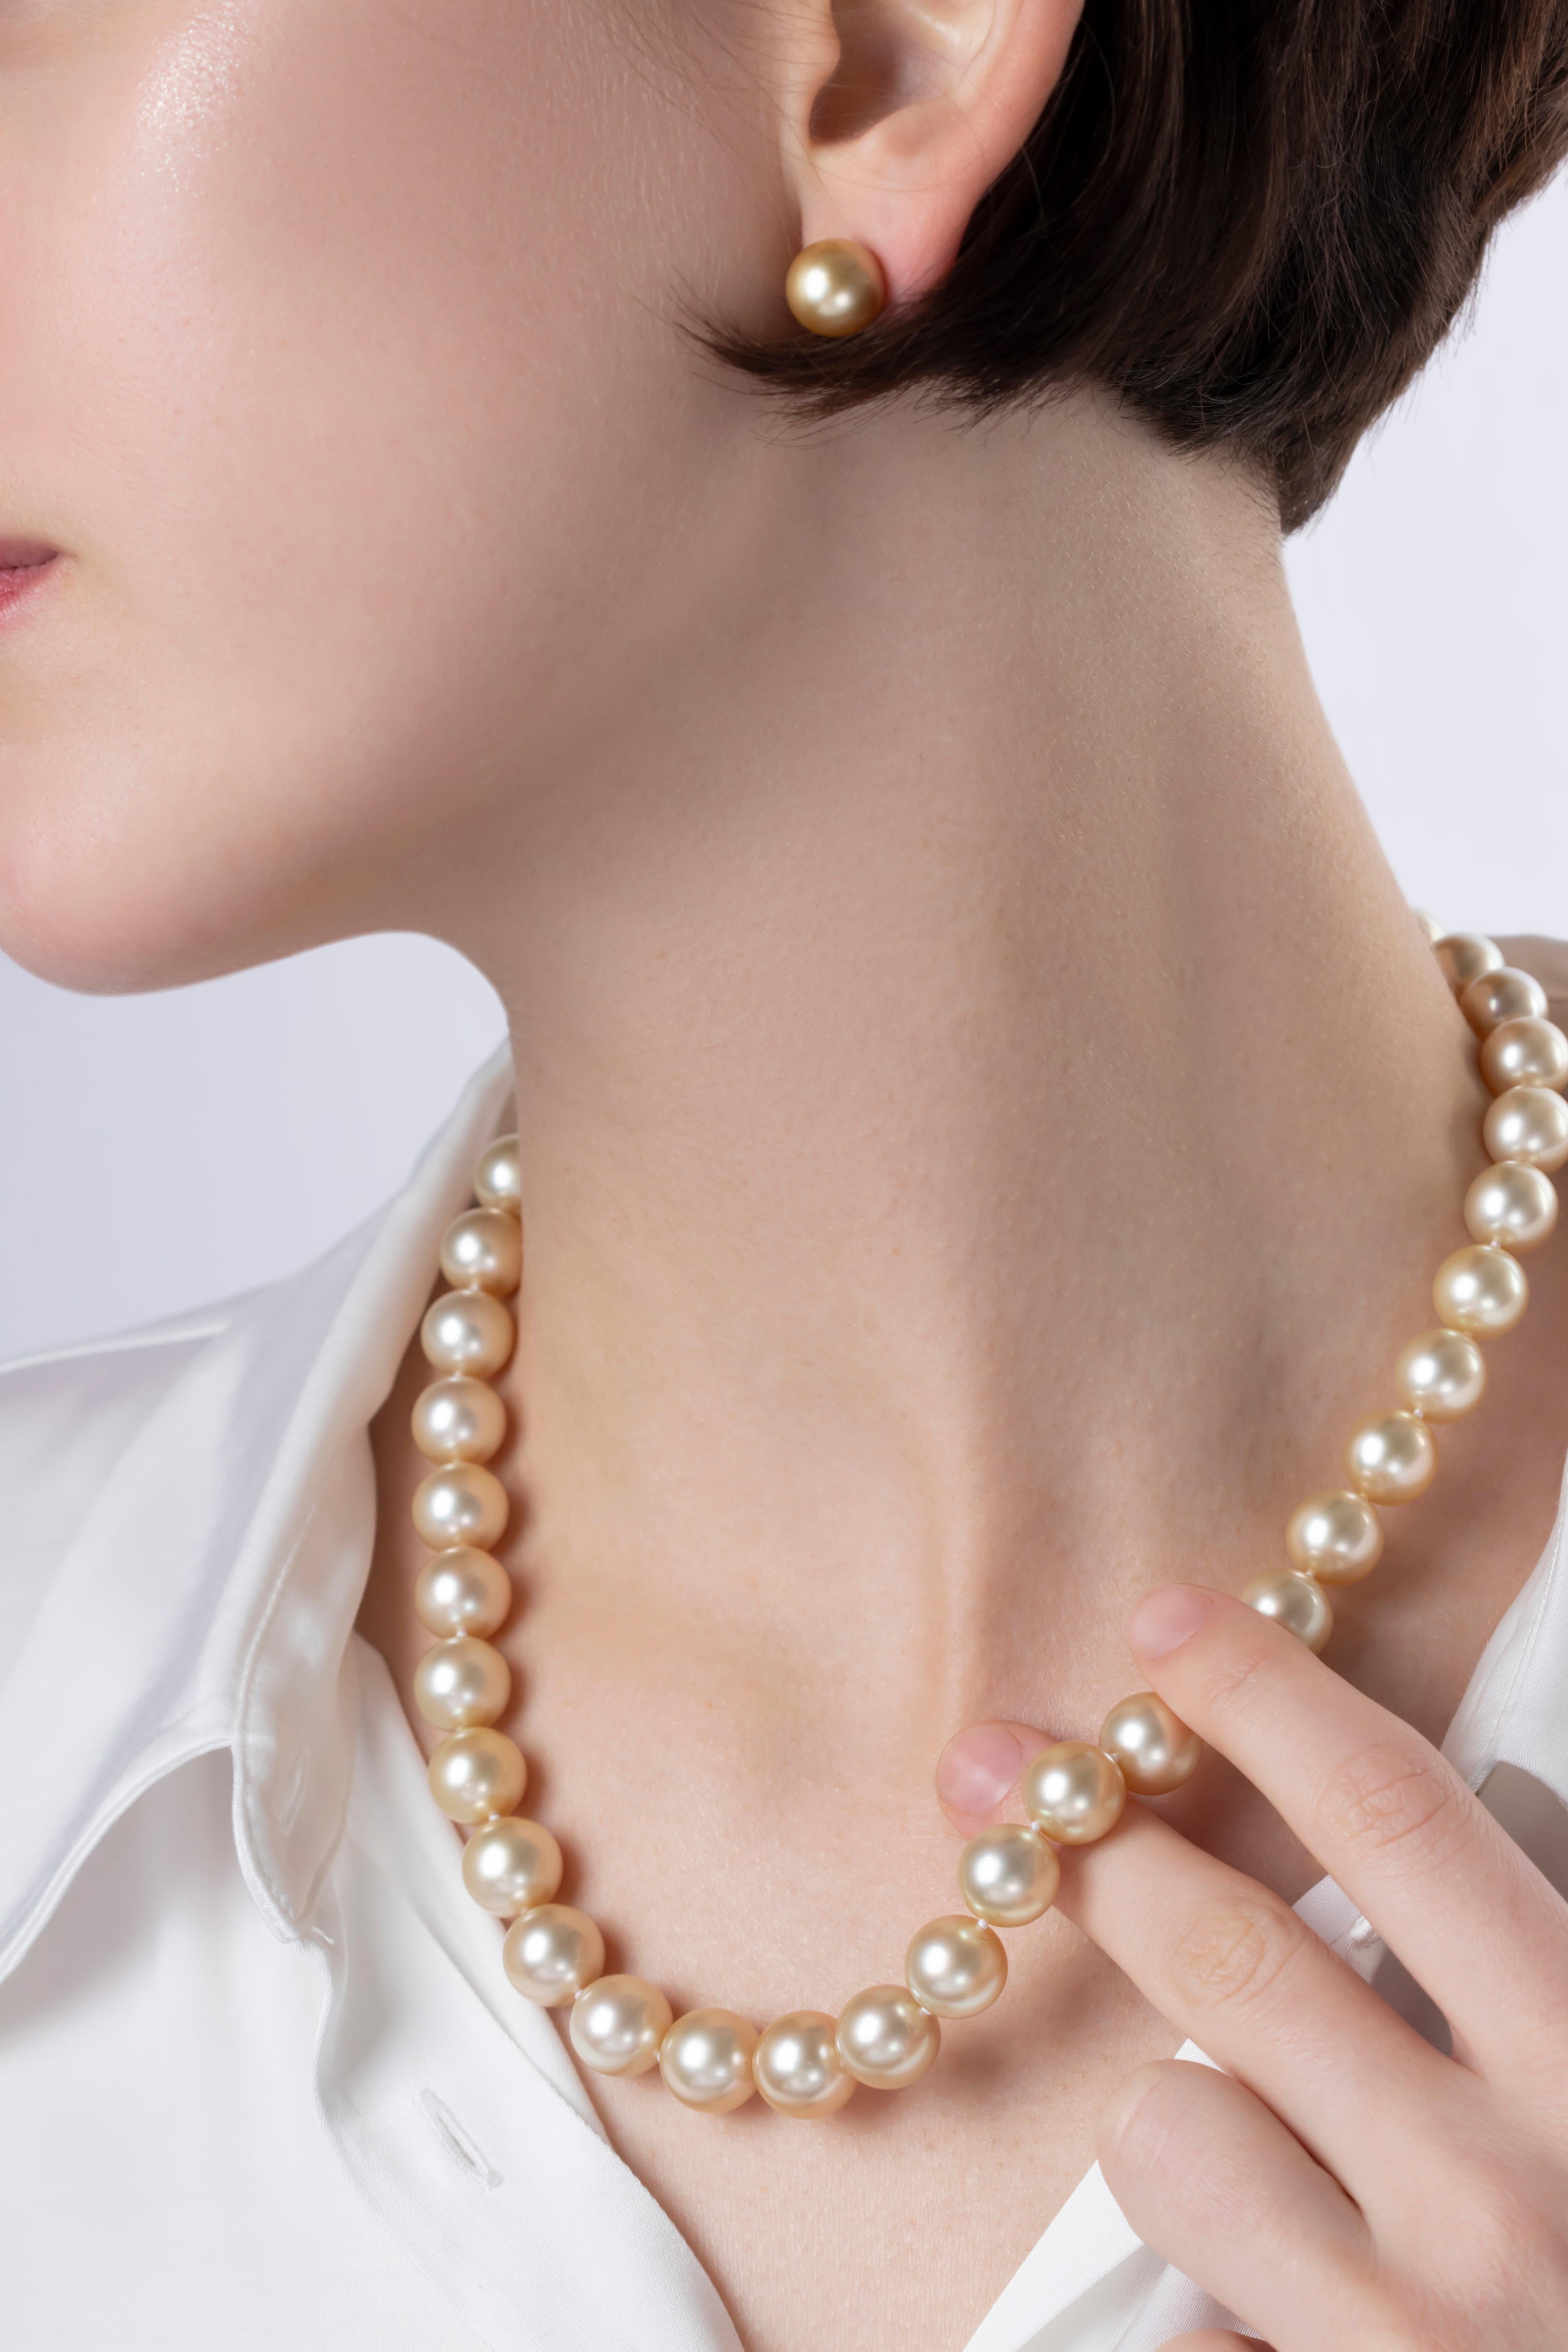 Comprised of timeless, jewellery box staples, our Classic collection is designed to last through the generations. Featuring pale Golden South Sea pearls set secured to an 18K white gold ball clasp, this necklace is both refined and elegant.
Other